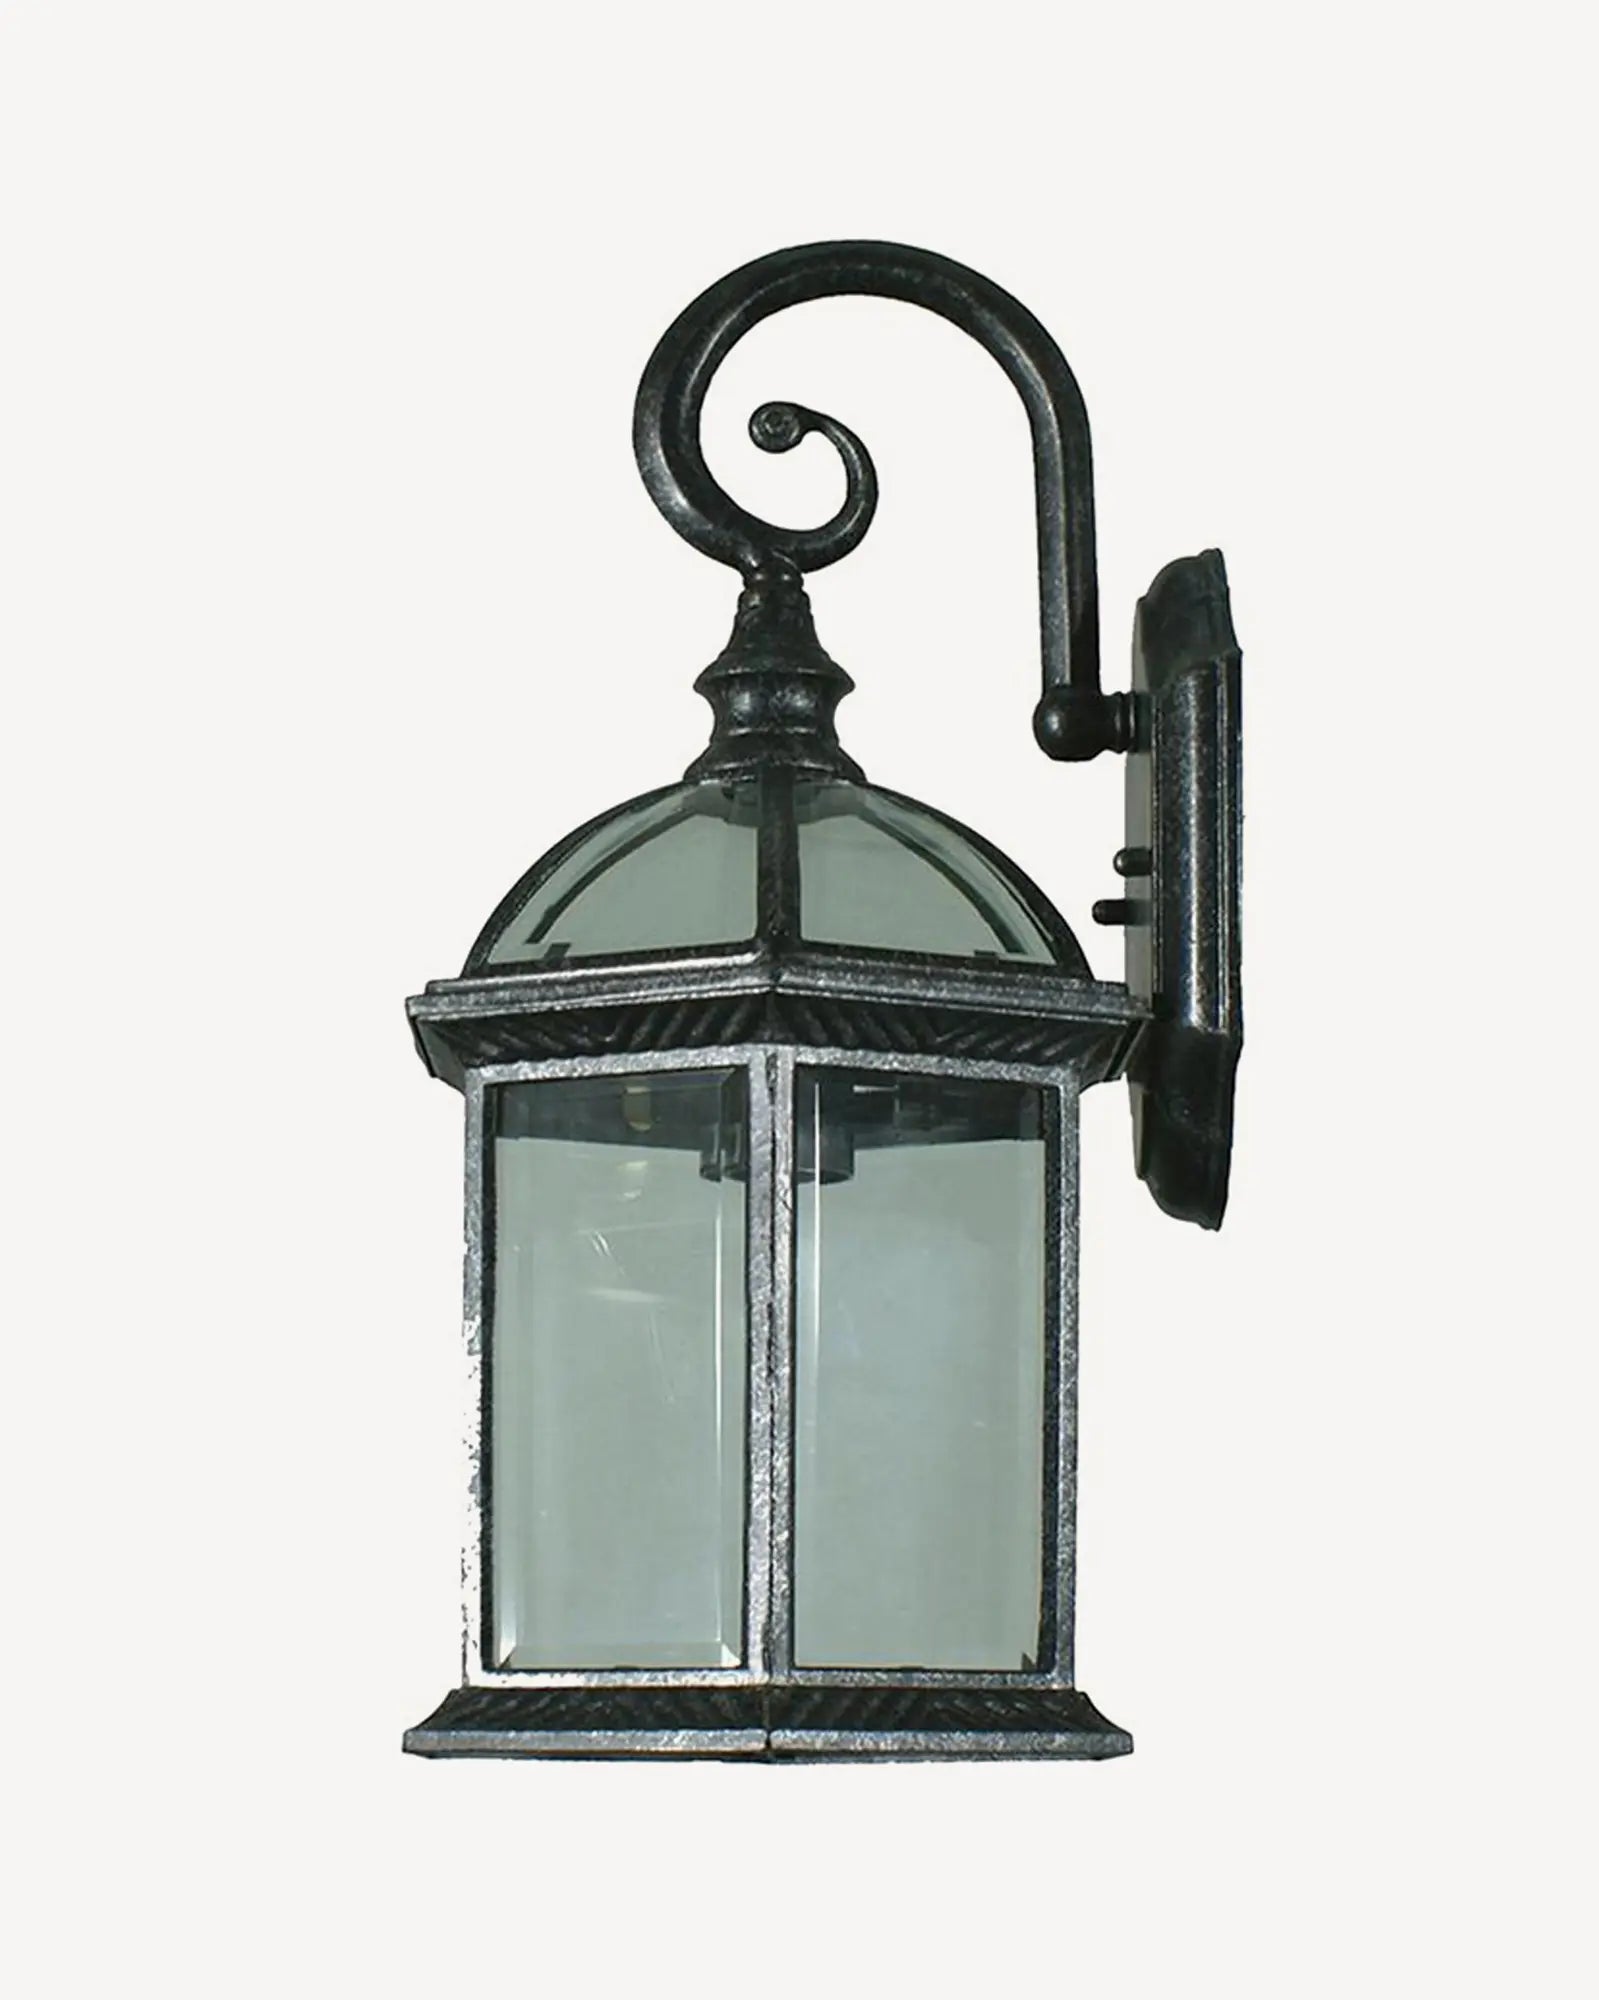 Station wall light by Inspiration Light at Nook Collections